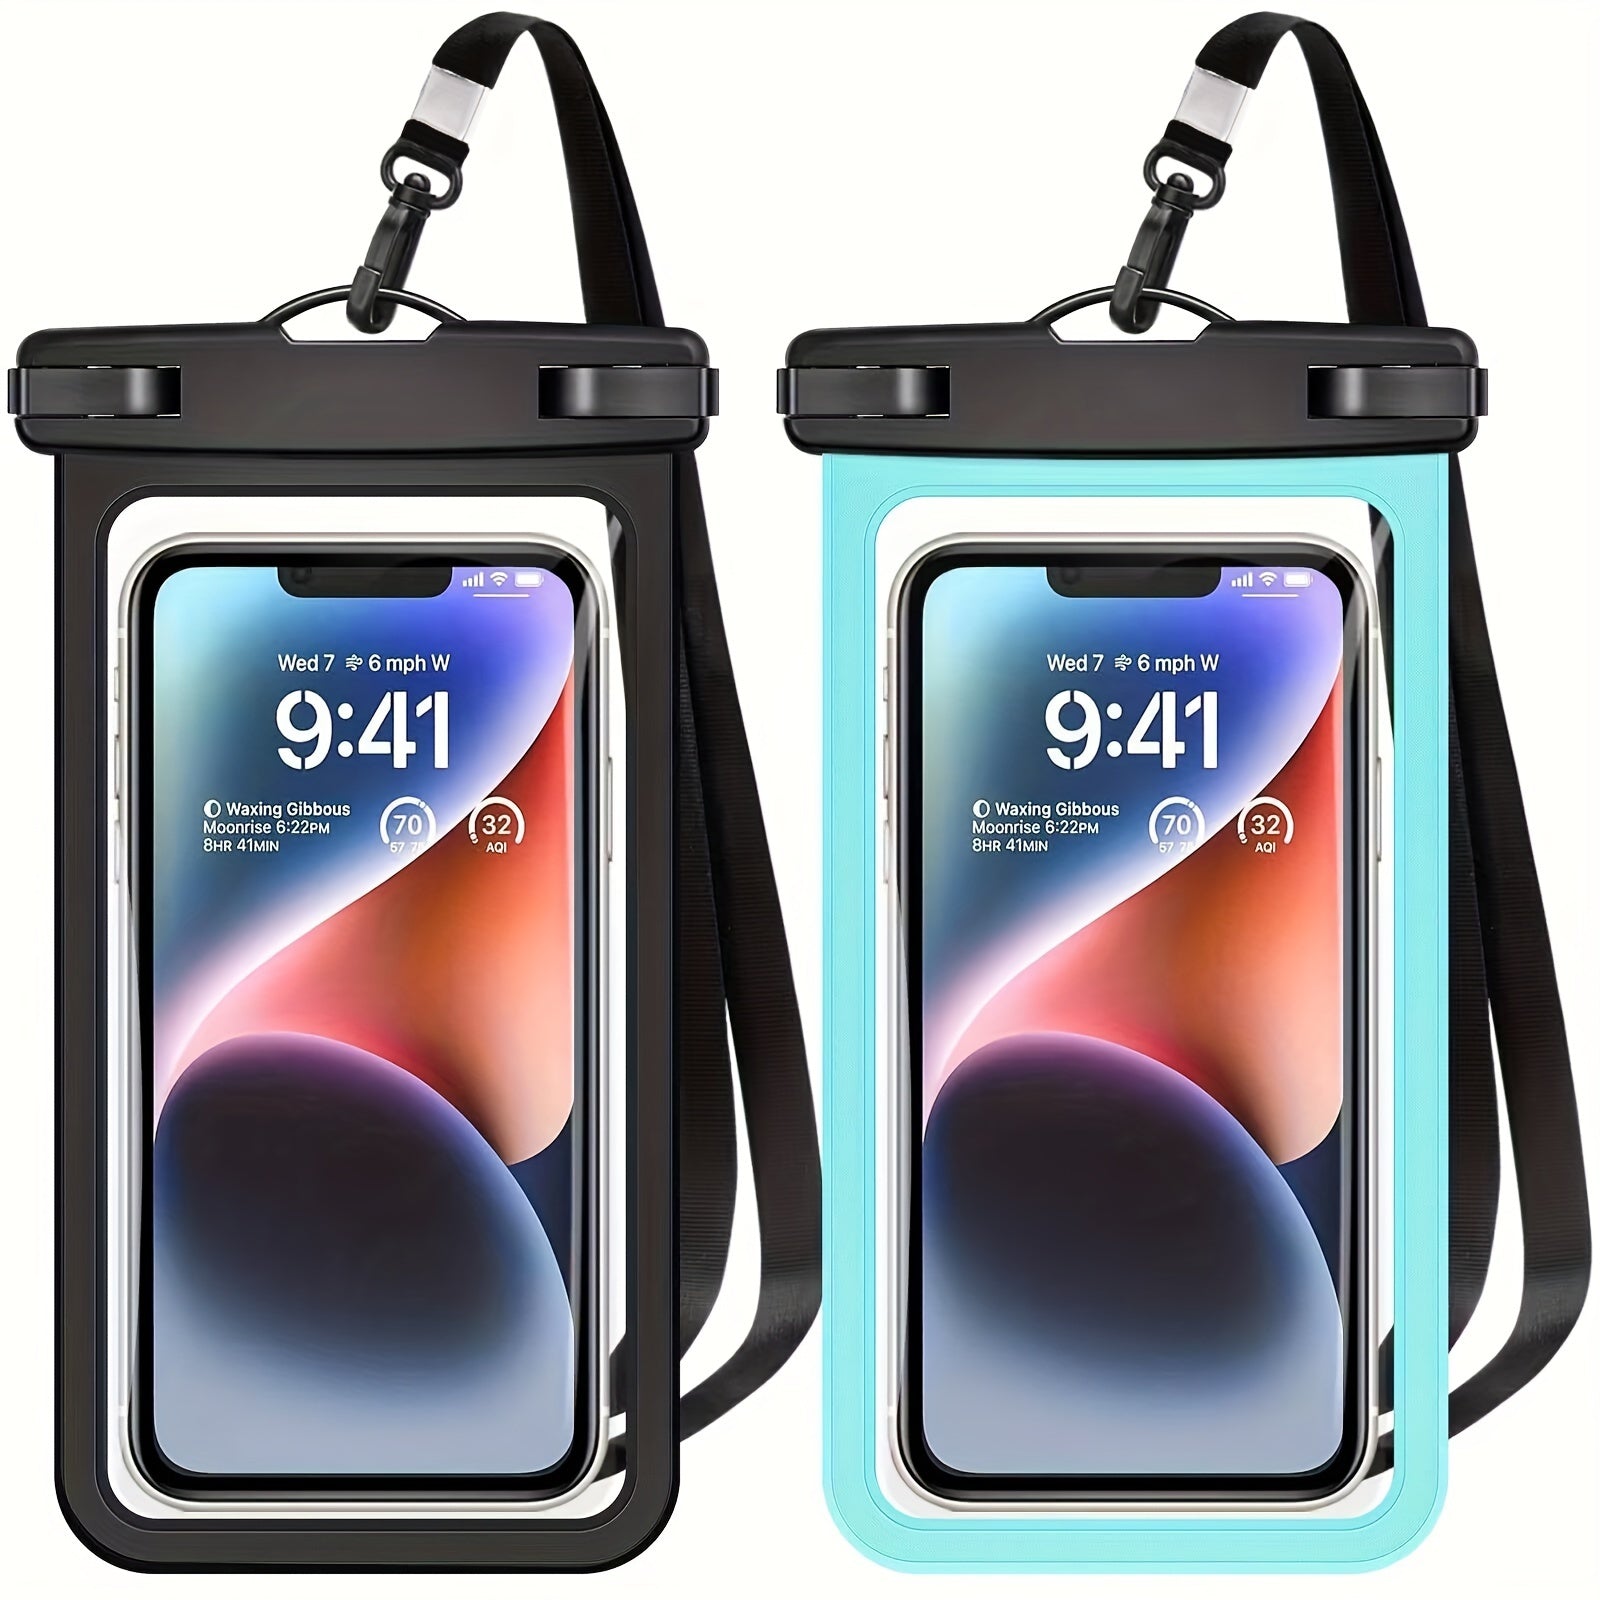 2 Packs Universal Waterproof Phone Pouch - Waterproof Case For IPhone 14 13 12 11 Pro Max XS Plus Samsung Galaxy Cellphone Up To 7.0" IPX8 Waterproof Cellphone Dry Bag Beach Vacation Essentials